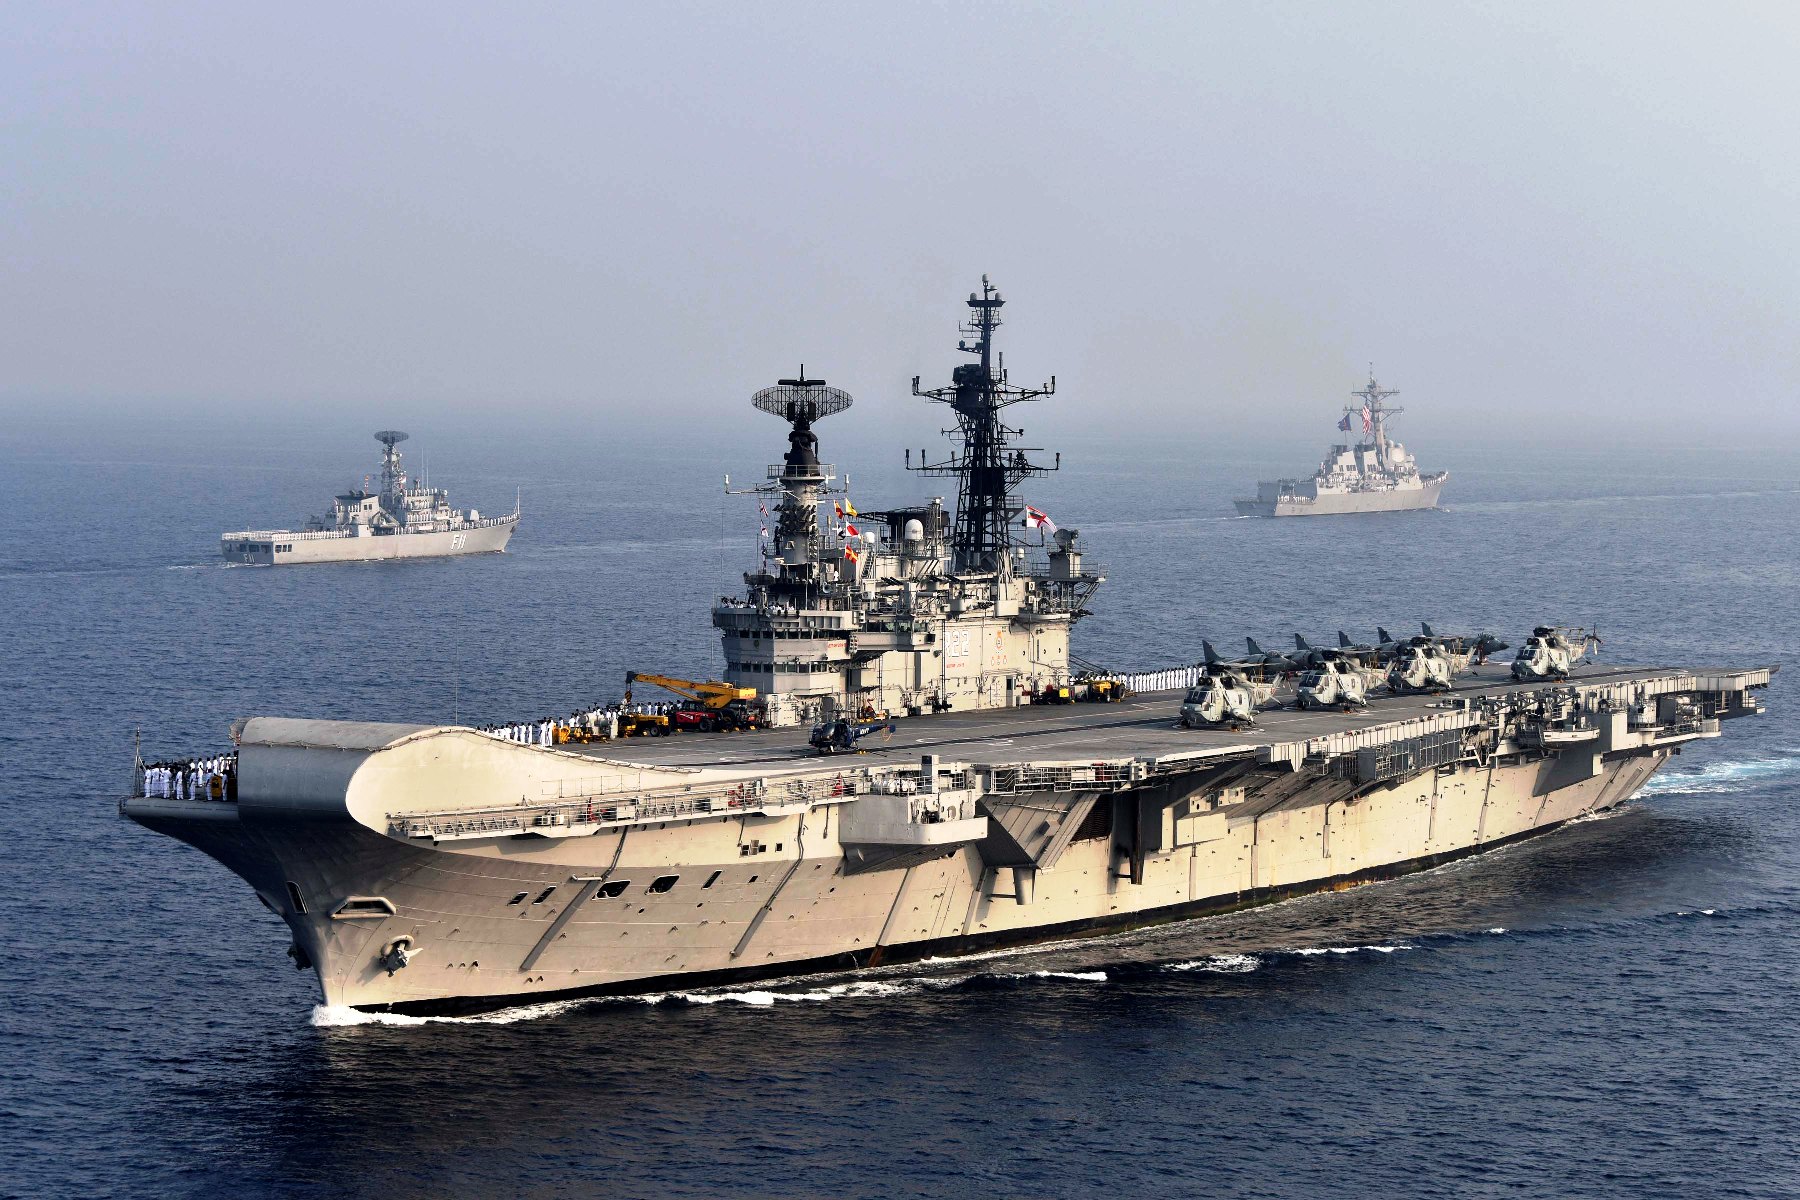 With the country recently starting to inject hefty sums into its naval service, 2030 may see it boasting "one of the top five navies on the planet." 